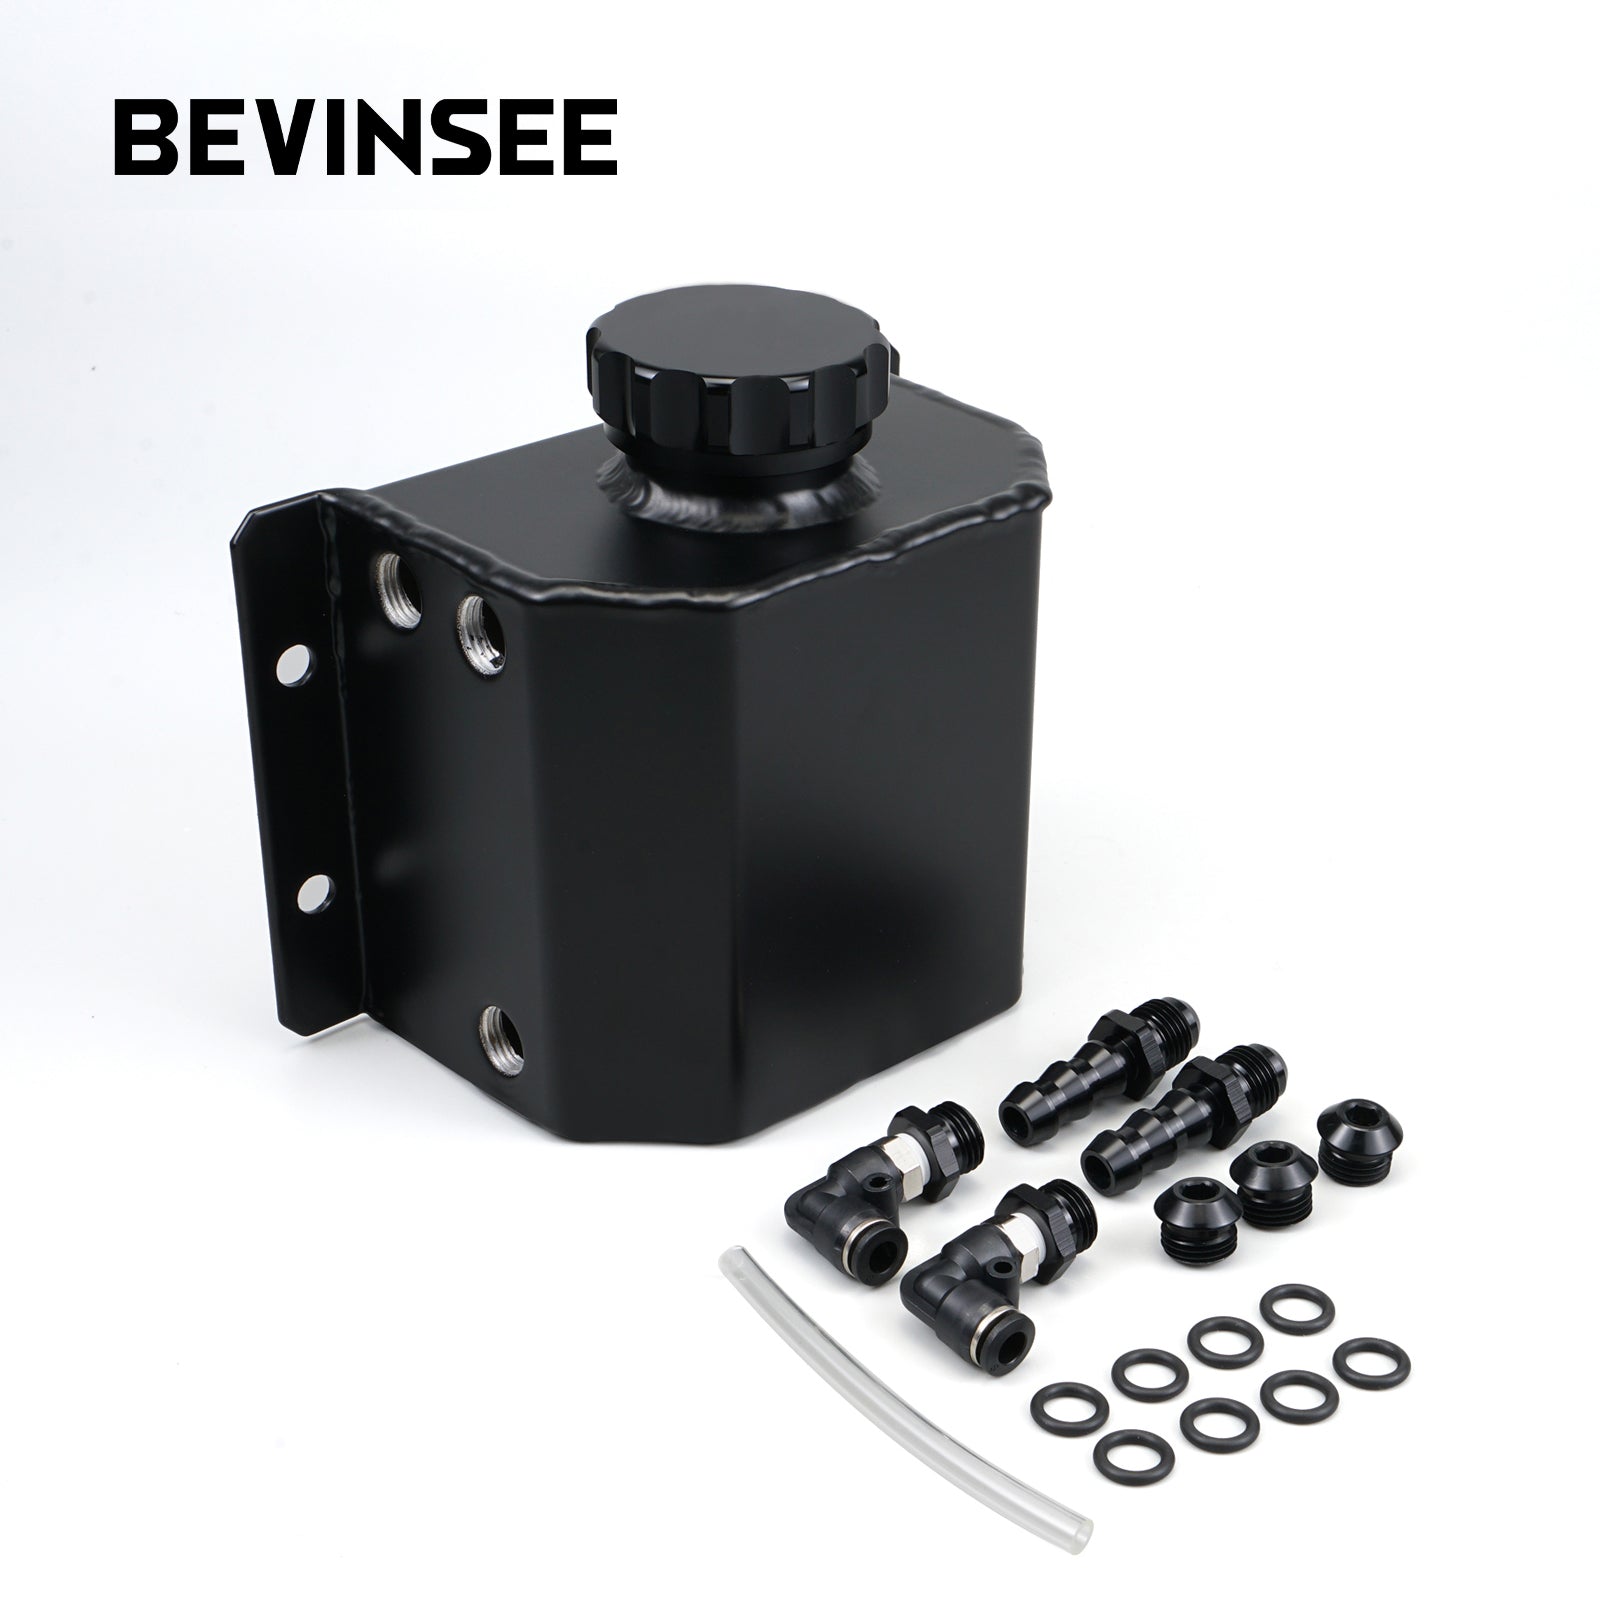 BEVINSEE Universal Aluminum 1L Coolant Radiator Overflow Recovery Water Tank Bottle